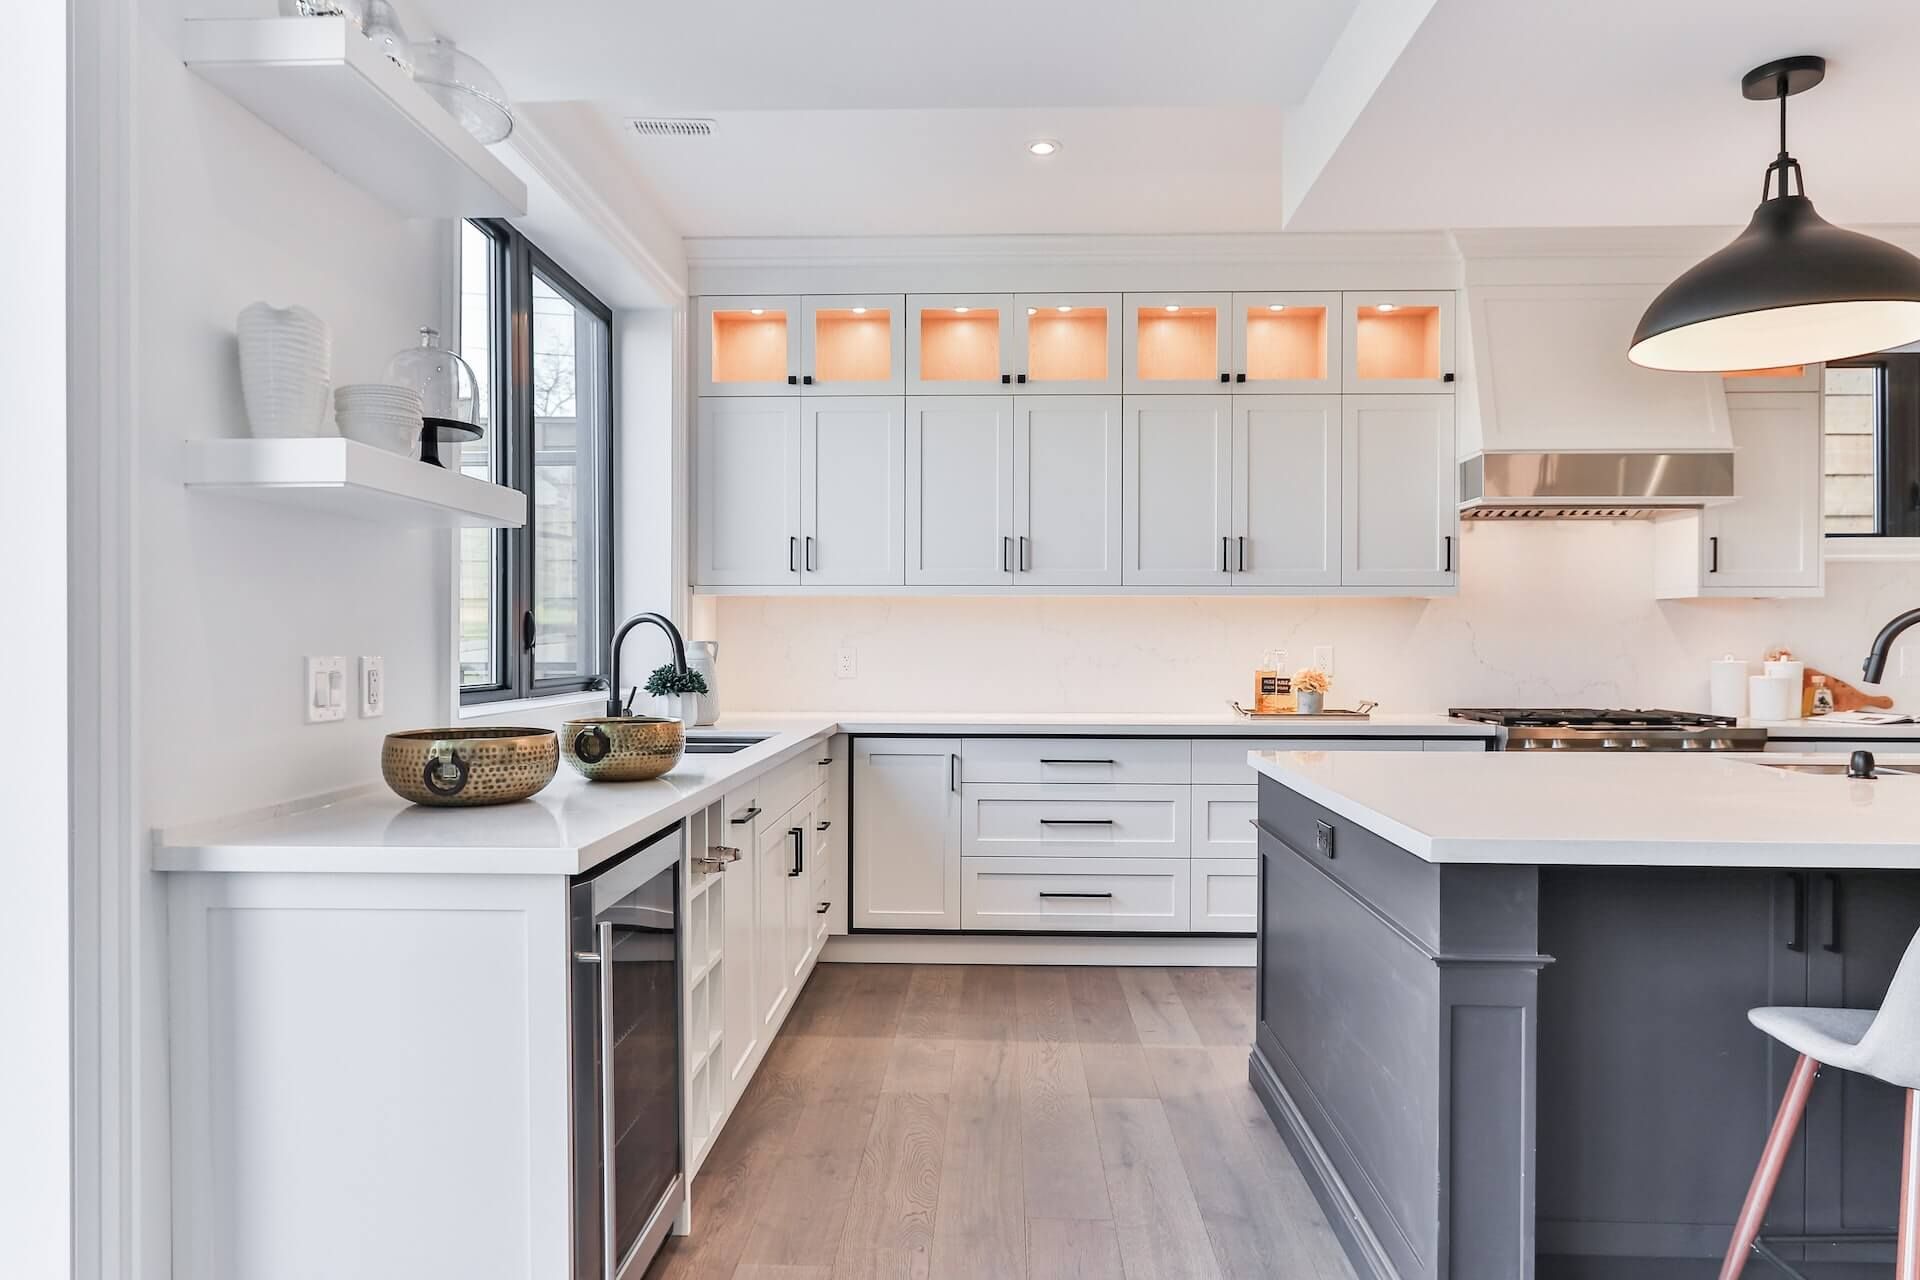 White kitchen layout with island in center and two different sinks